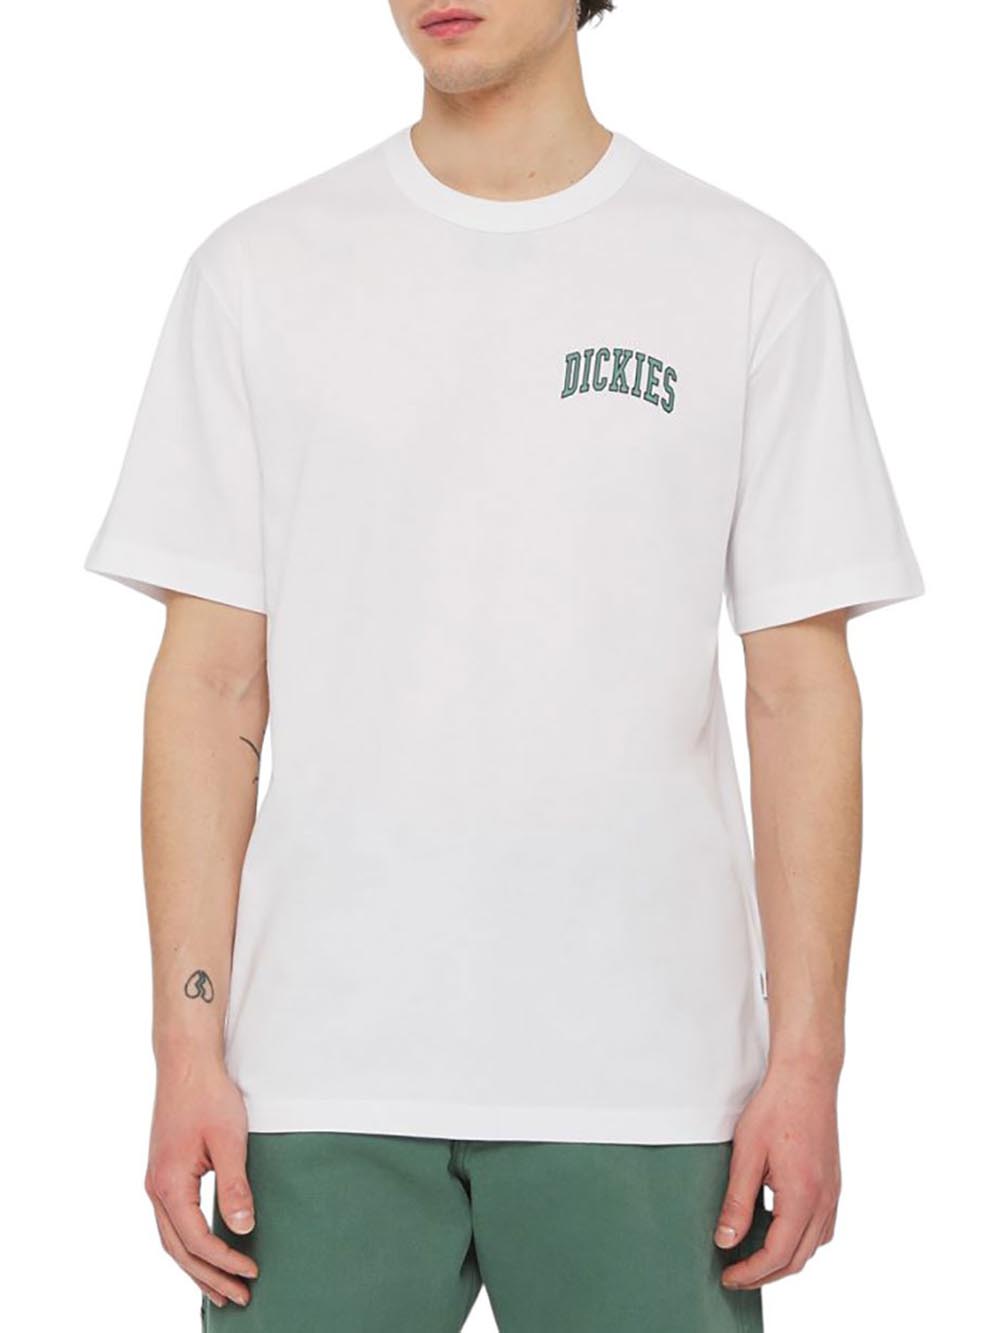 Dickies T-shirt Uomo Aitkin Chest Dk0a4y8o Bianco